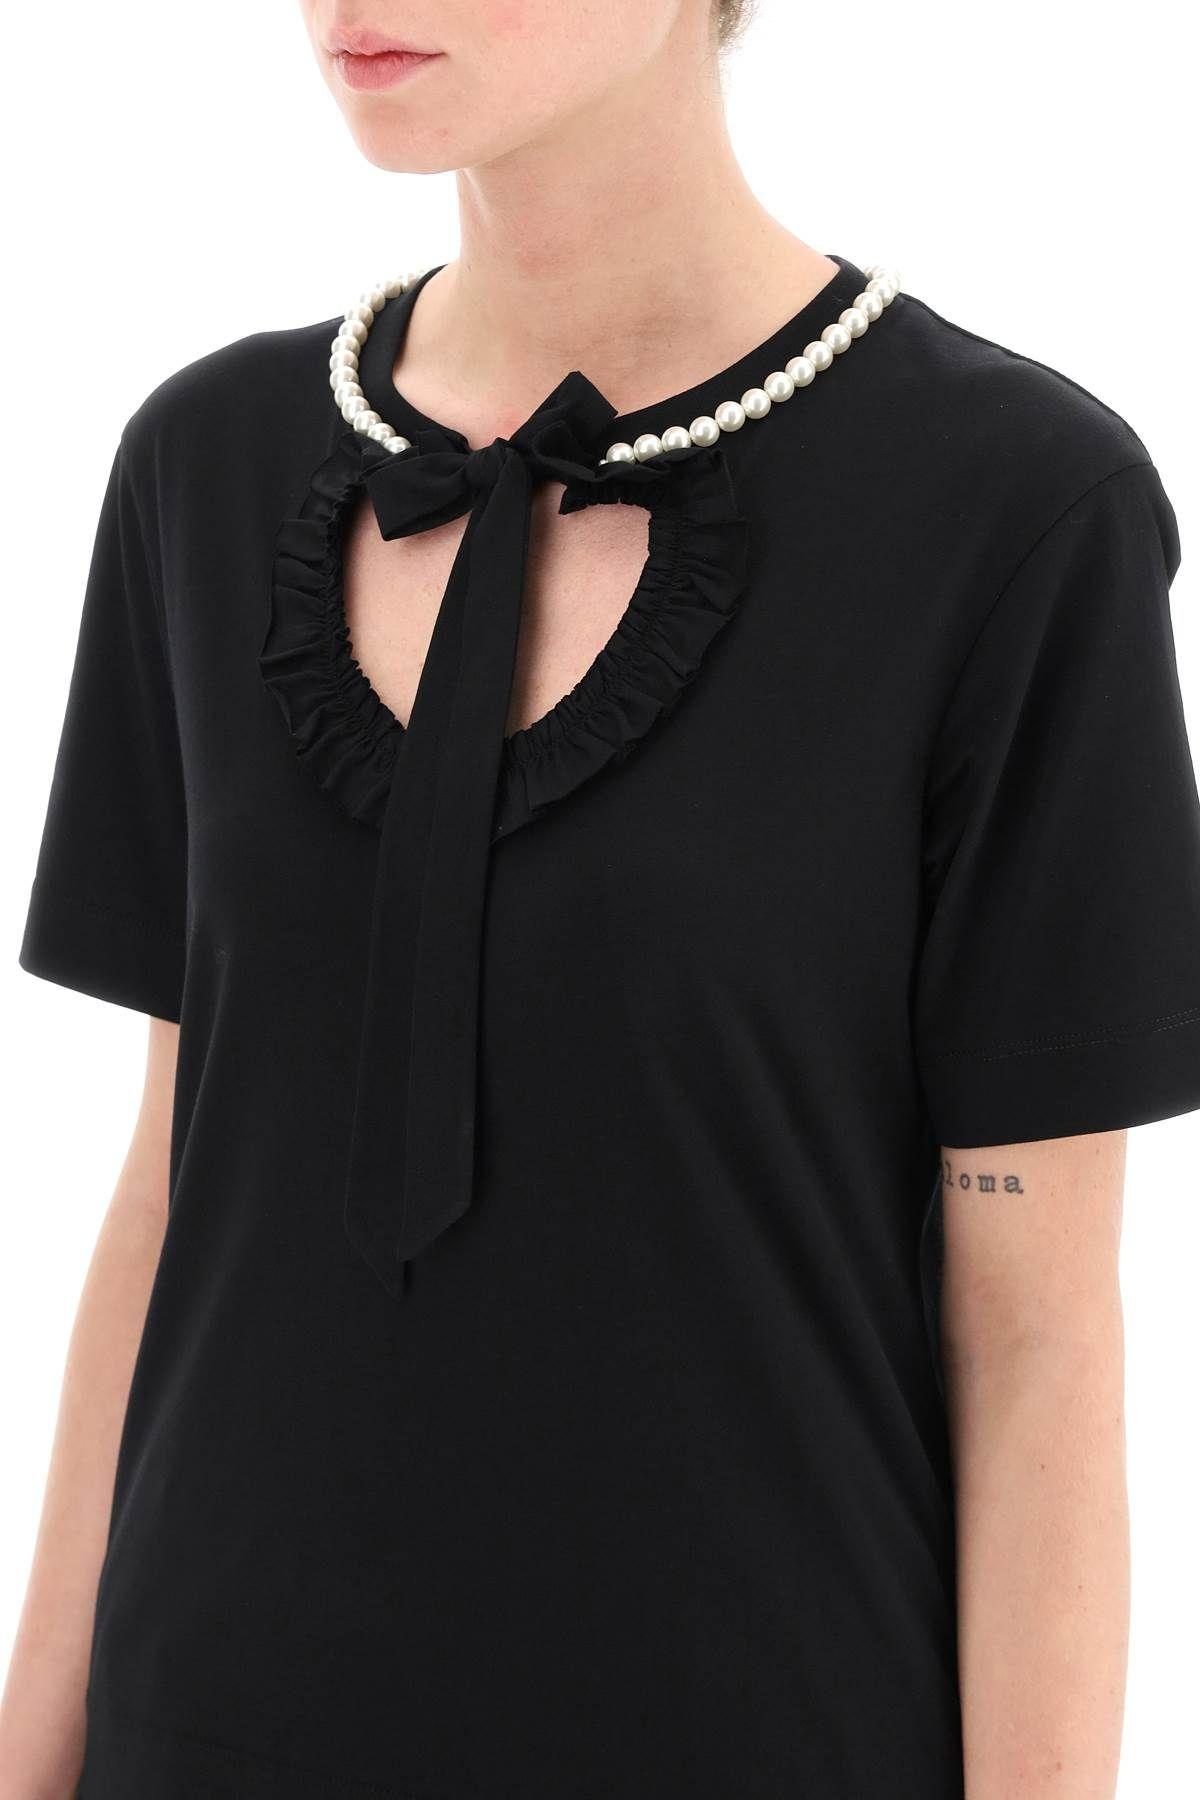 T-SHIRT WITH HEART-SHAPED CUT-OUT AND PEARLS SIMONE ROCHA - 5